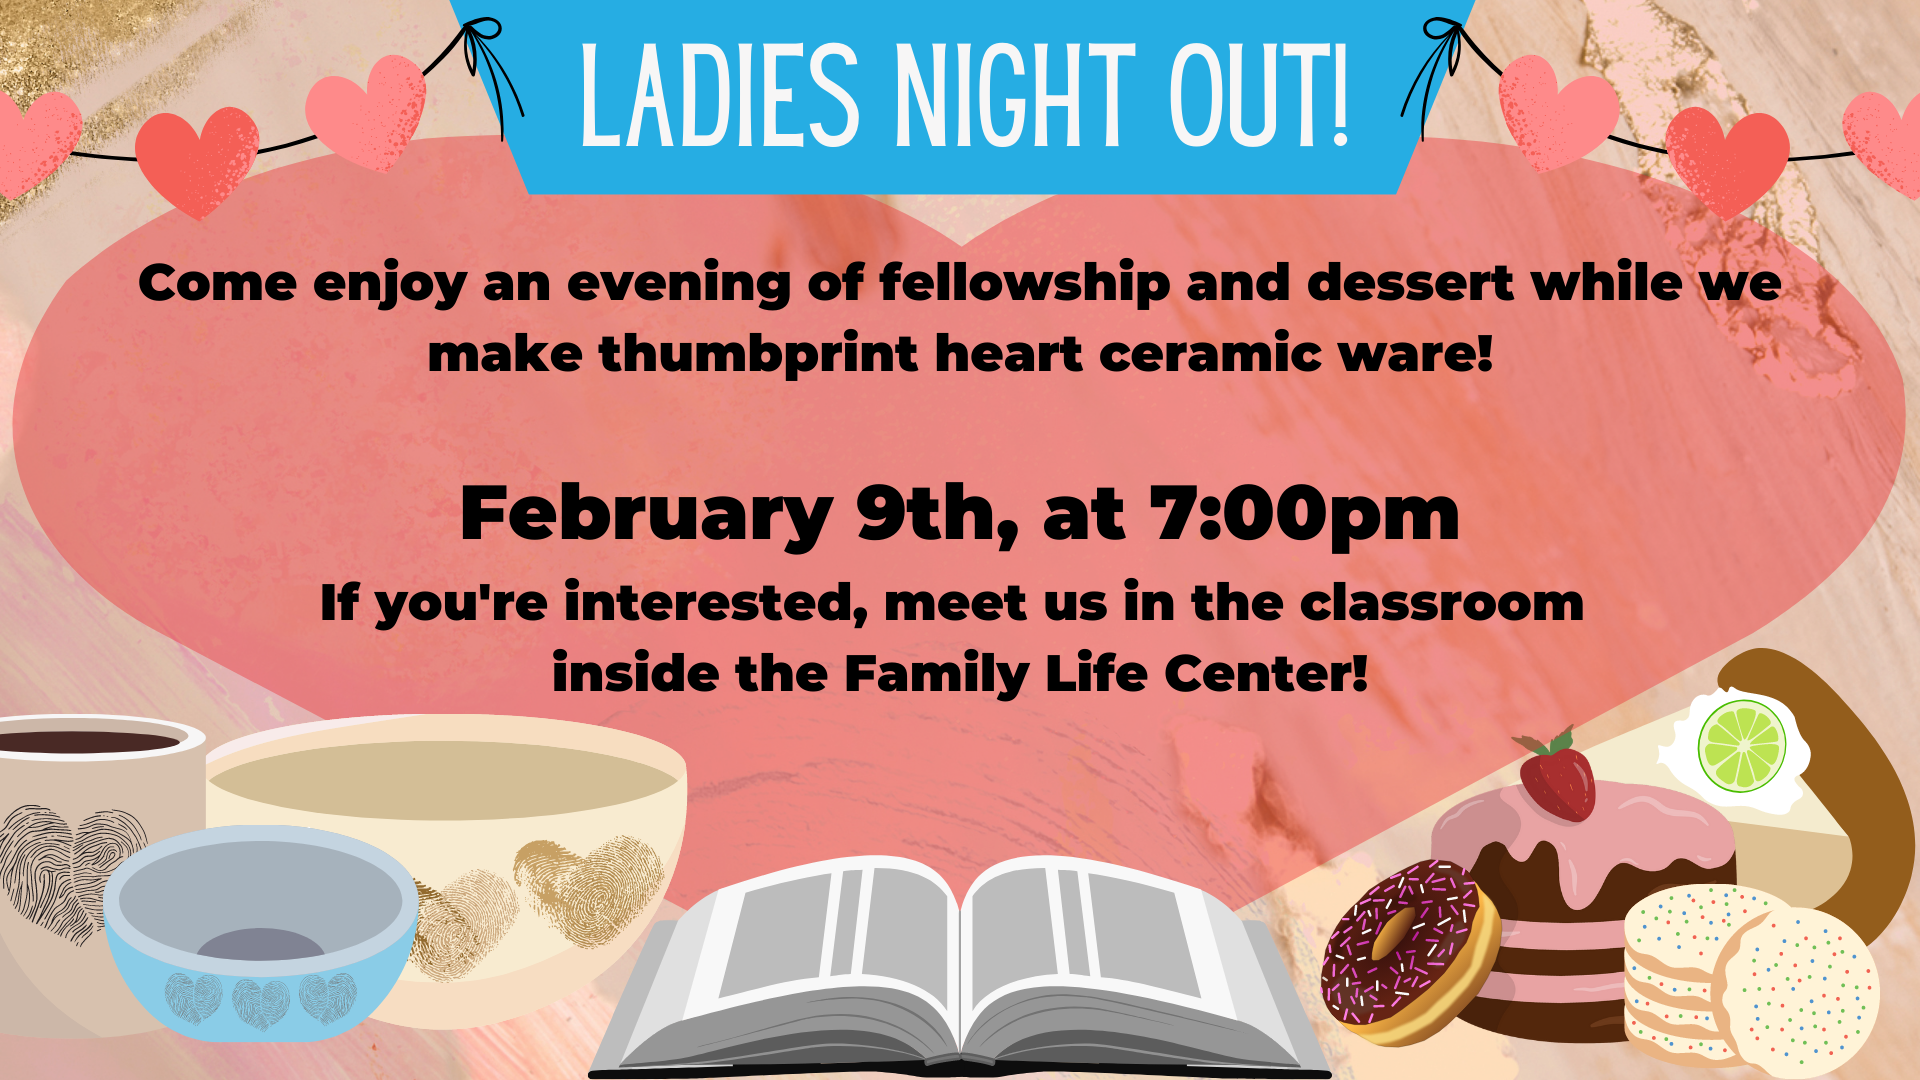 Women's Ministry - Ladies Night Out (1).png